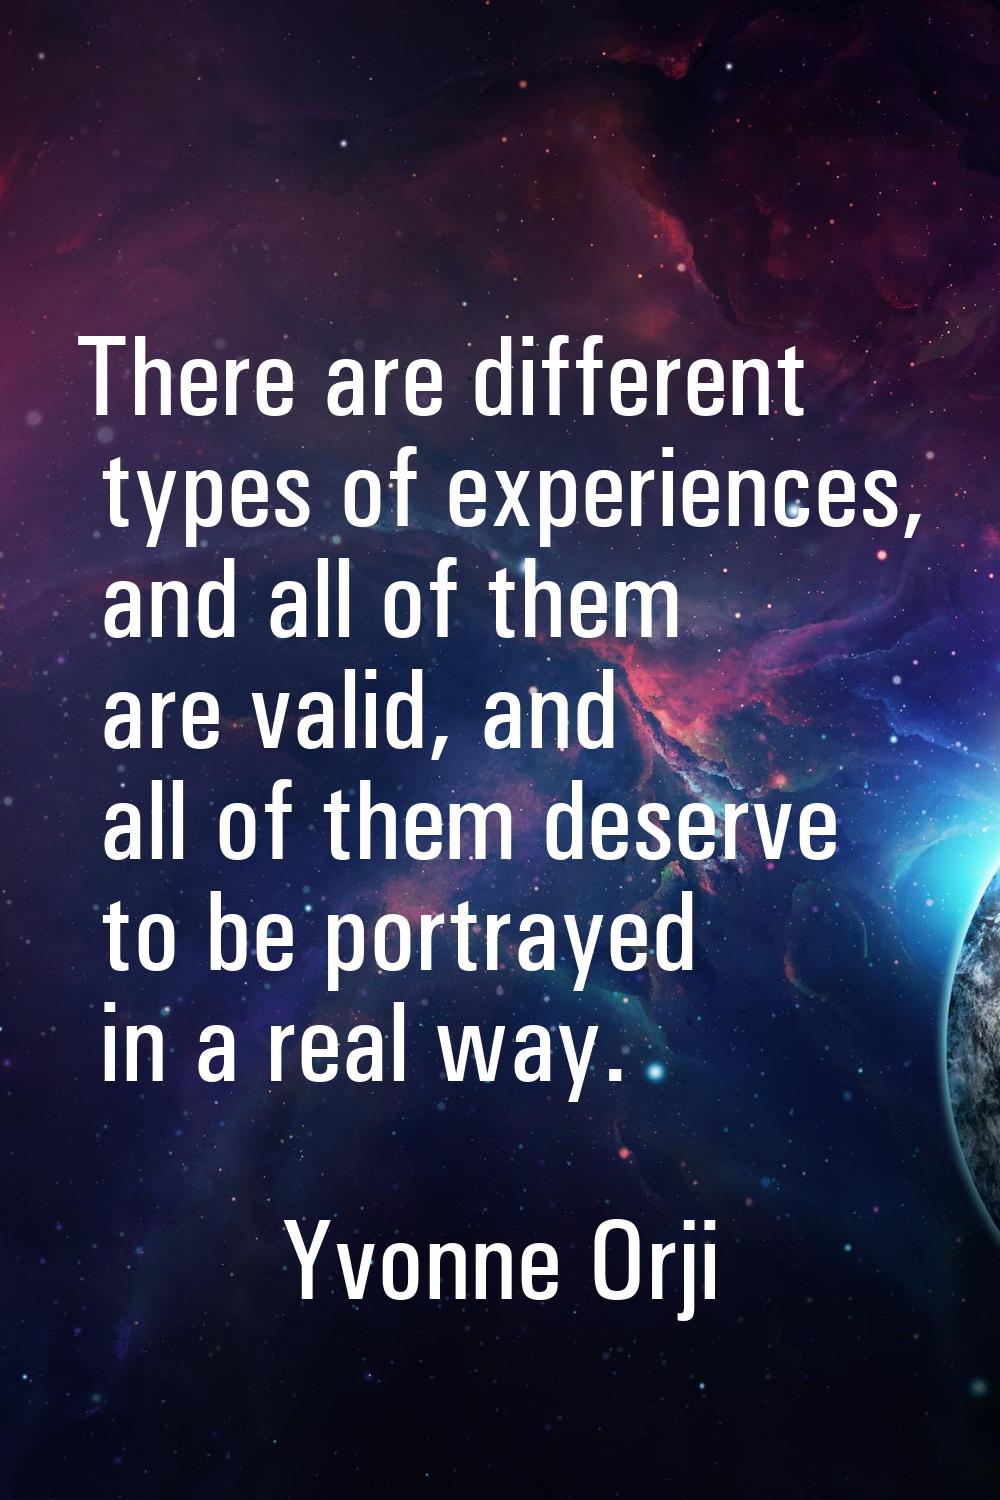 There are different types of experiences, and all of them are valid, and all of them deserve to be 